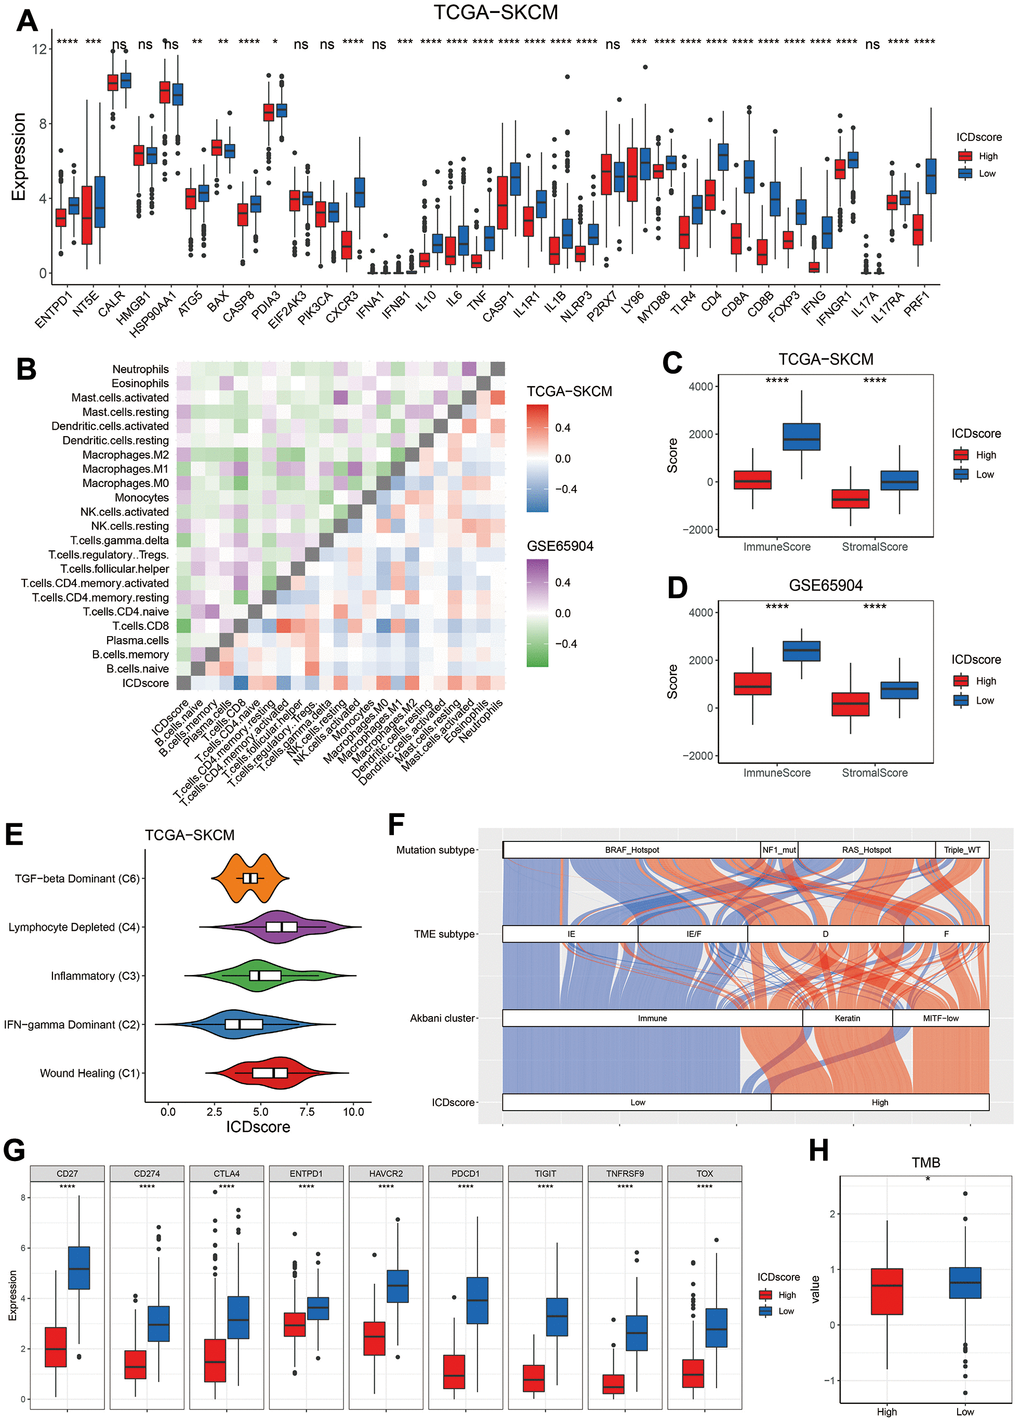 Immune profile of ICDscore-based classification. (A) Gene expression comparison of 34 ICD related genes between ICDscore-high and ICDscore-low subgroups in the TCGA-SKCM cohort. (B) Correlation analyses between ICDscore and infiltration level of 22 immune cells in the TCGA-SKCM and GSE65904 datasets. (C, D) Comparison of immunescore (C) and stromalscore (D) between ICDscore-high and ICDscore-low subgroups in the TCGA-SKCM and GSE65904 datasets. (E) Box plot showing a difference in the value of ICDscore across the five subtypes for melanoma patients in the TCGA